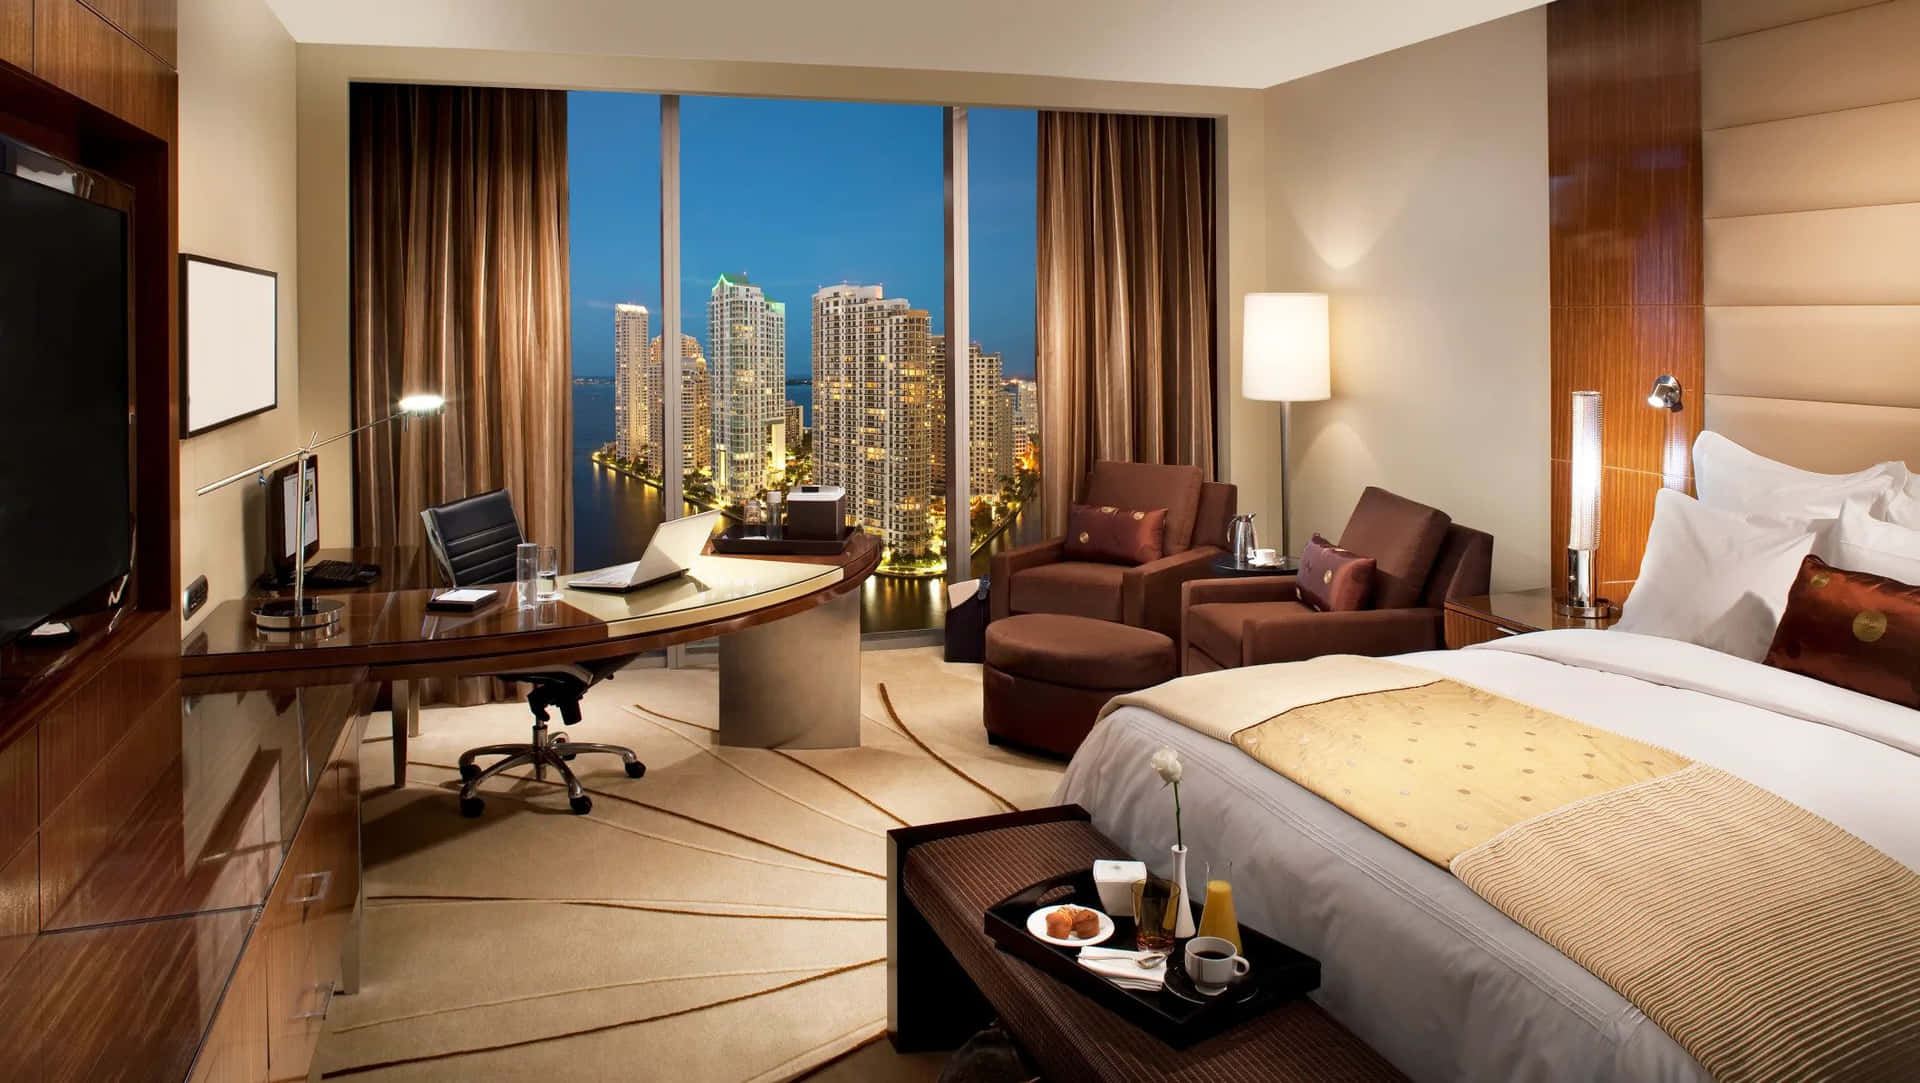 A Hotel Room With A Bed, Desk, And A View Of The City